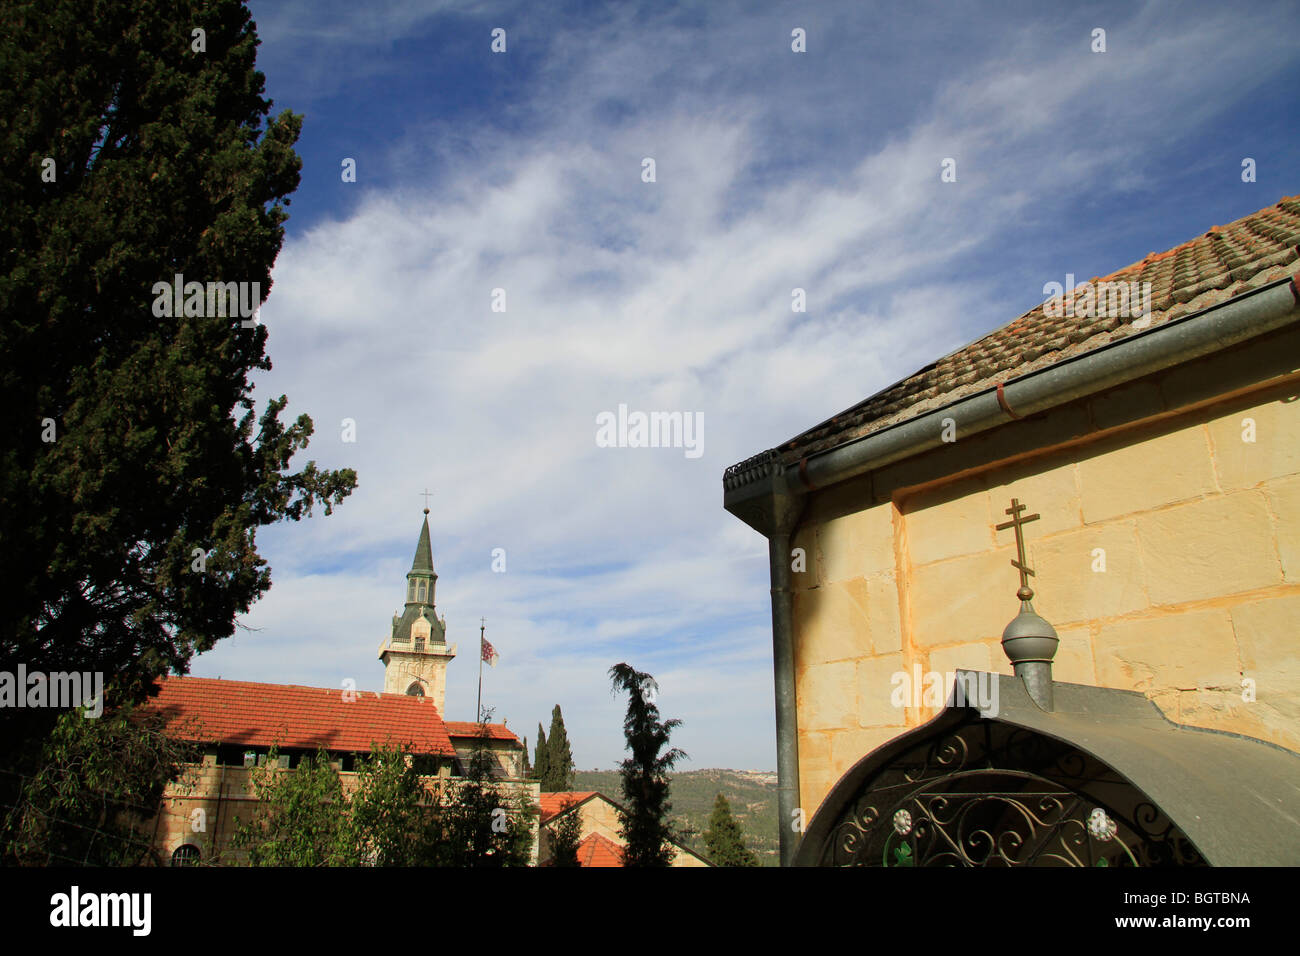 Israel, Ein Karem, the Franciscan Church of the Visitation as seen from the Russian Orthodox convent Stock Photo